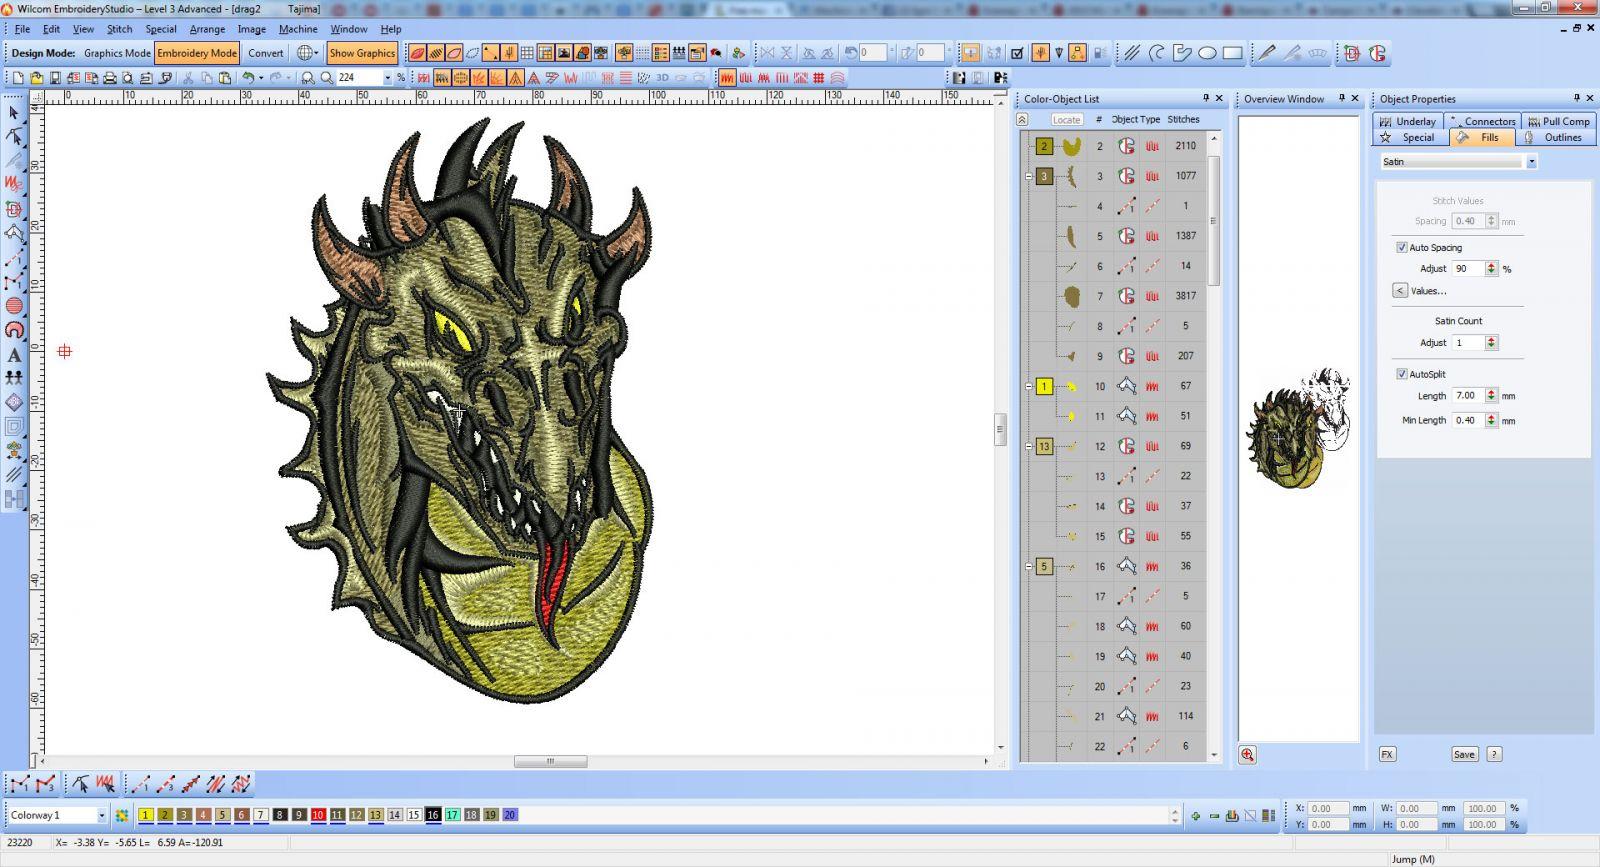 Dragon embroidery design screen shot from Wilcom software